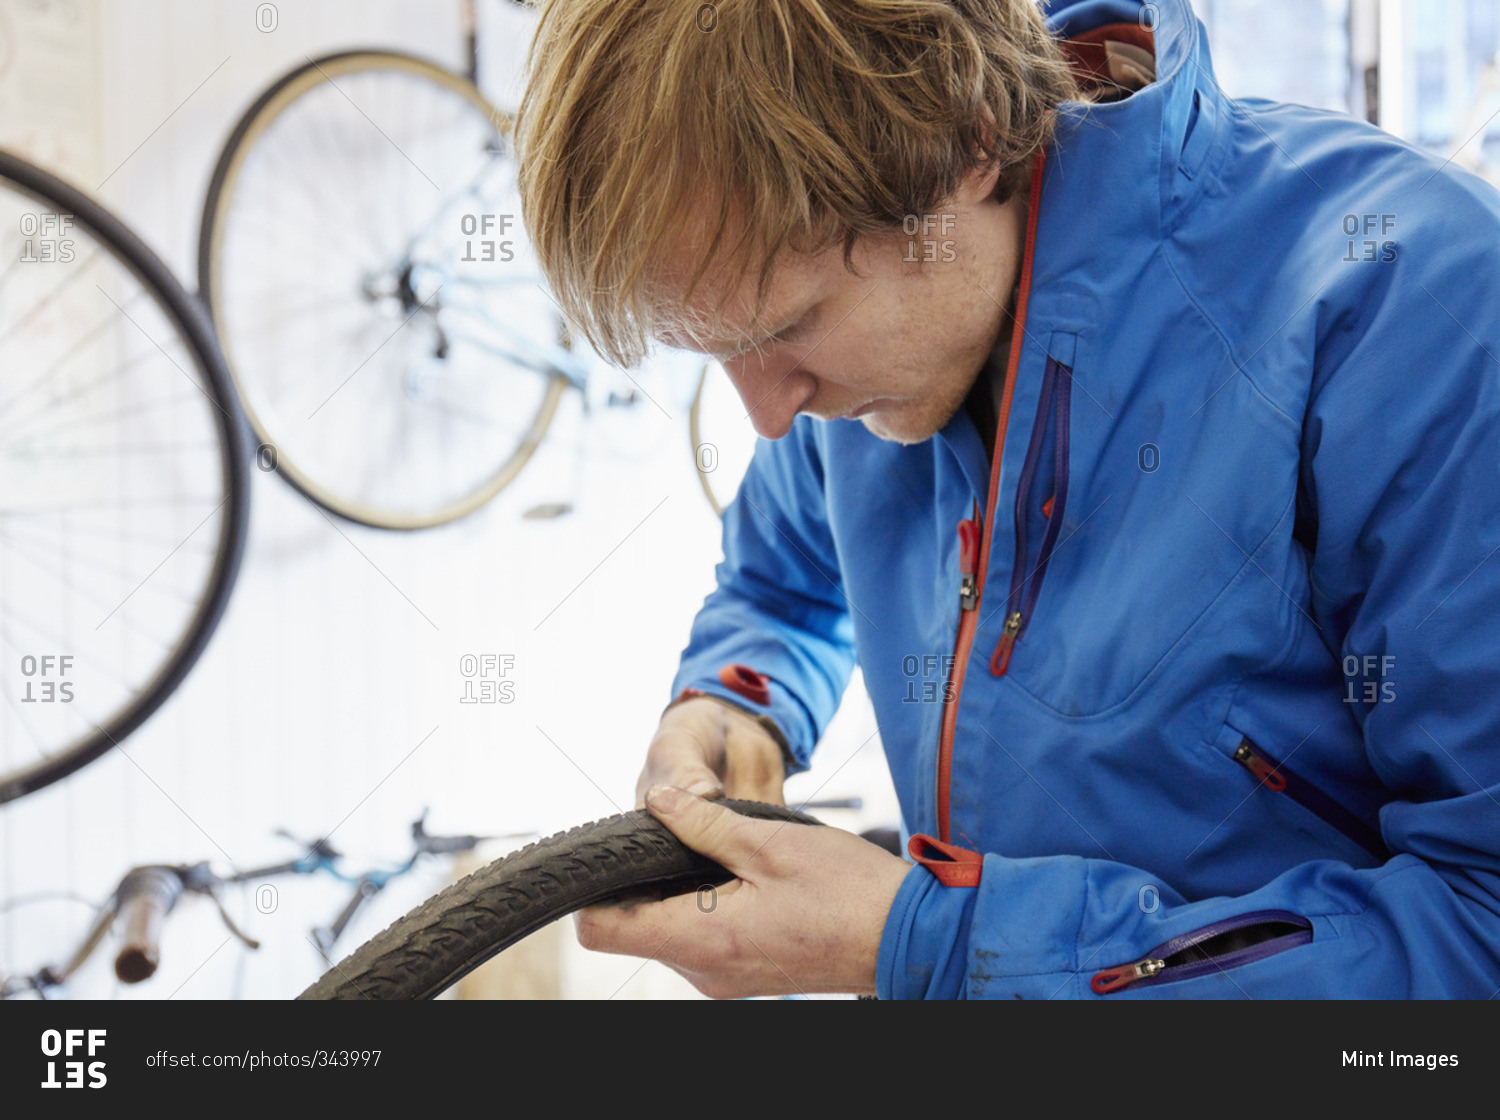 A young man repairing a bicycle